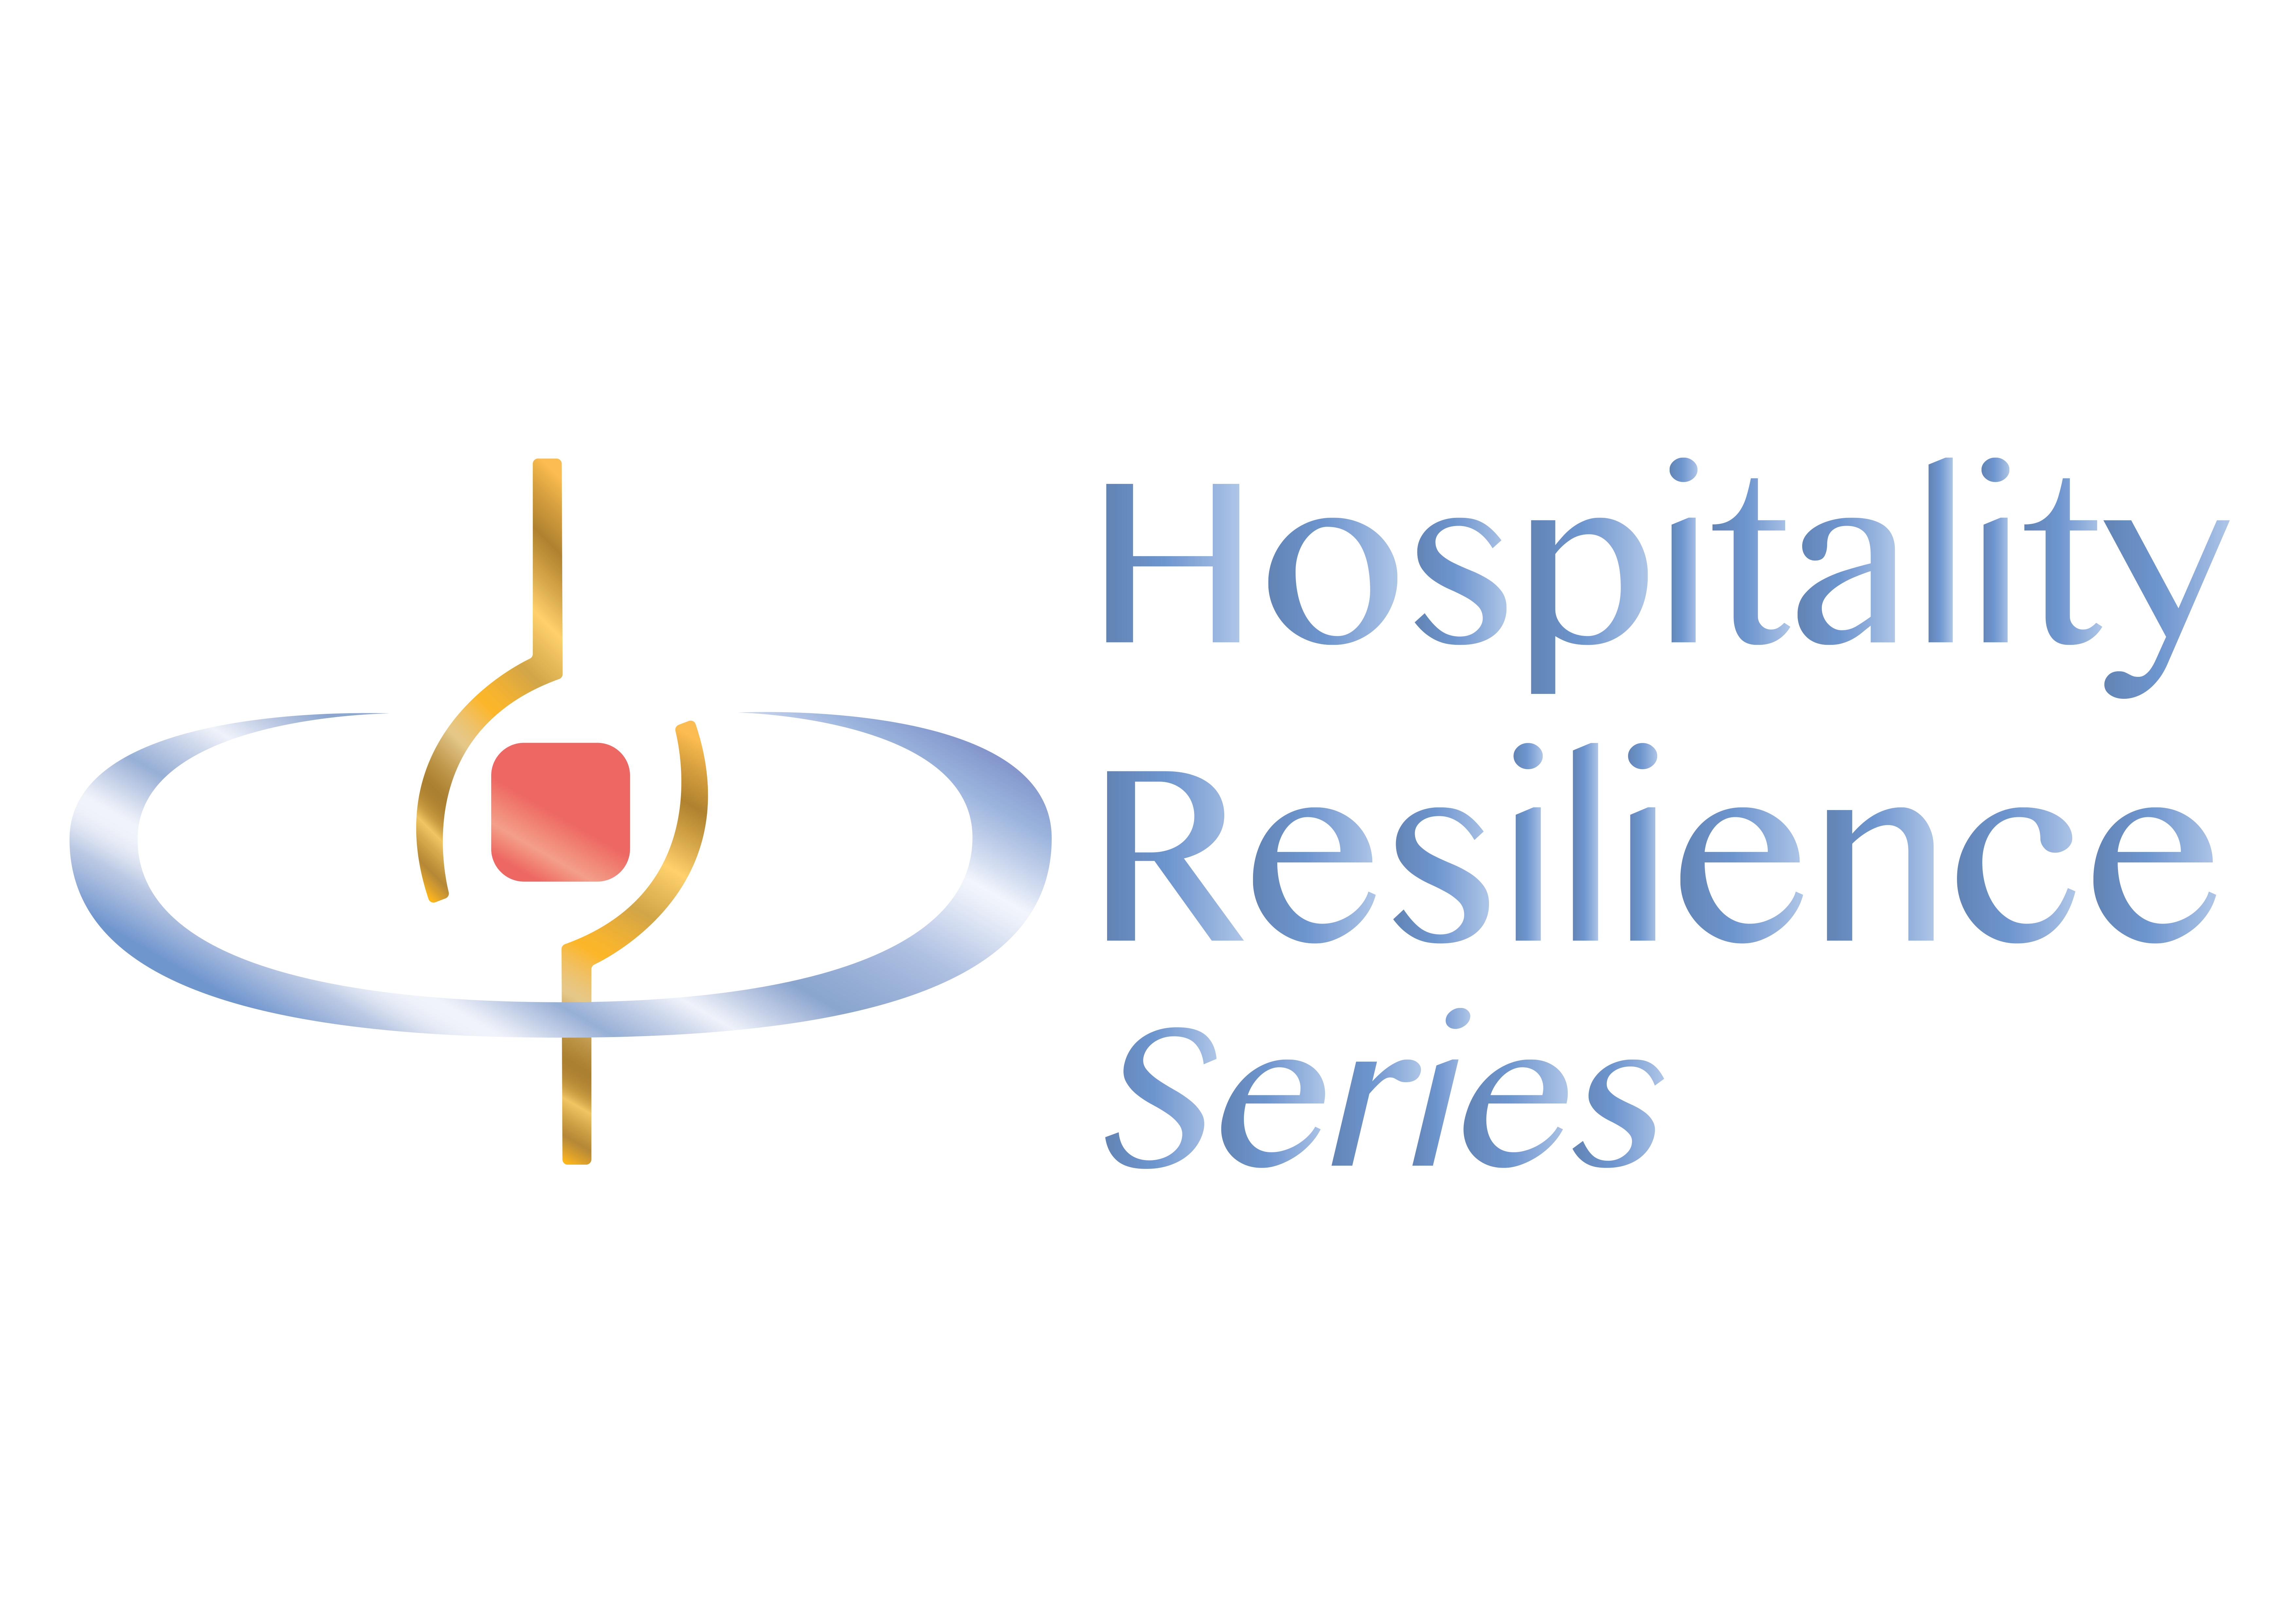 The Hospitality Resilience Series logo